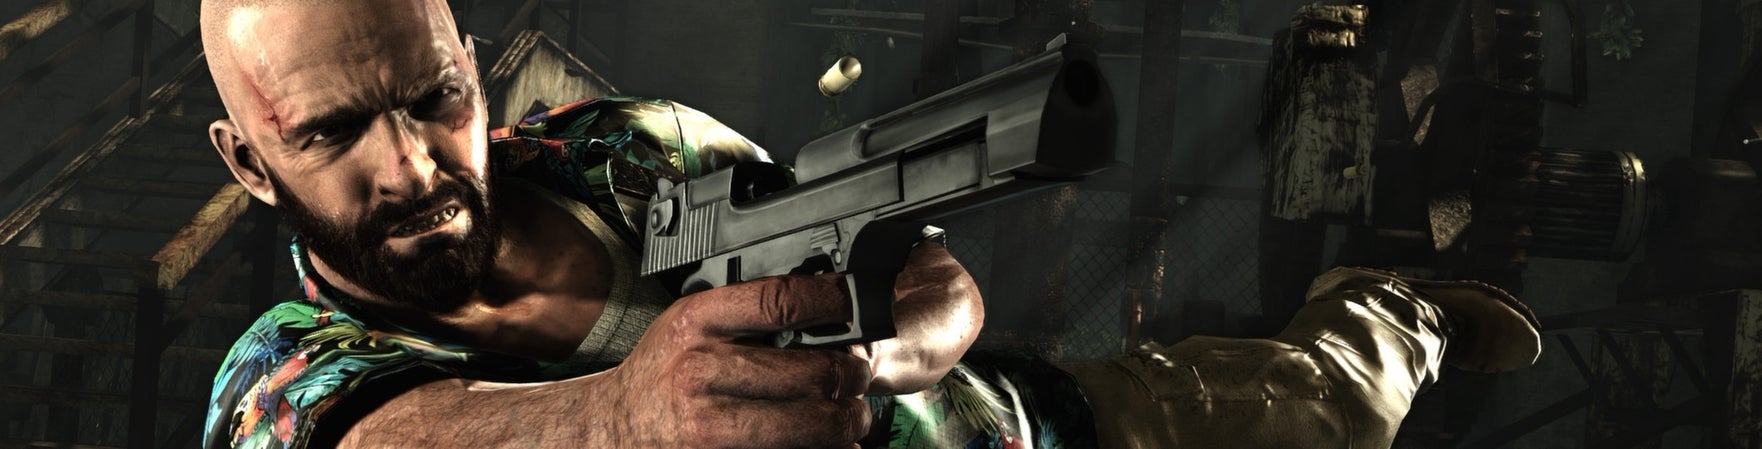 Image for Max Payne 3 and the conflict at the heart of Rockstar's game design